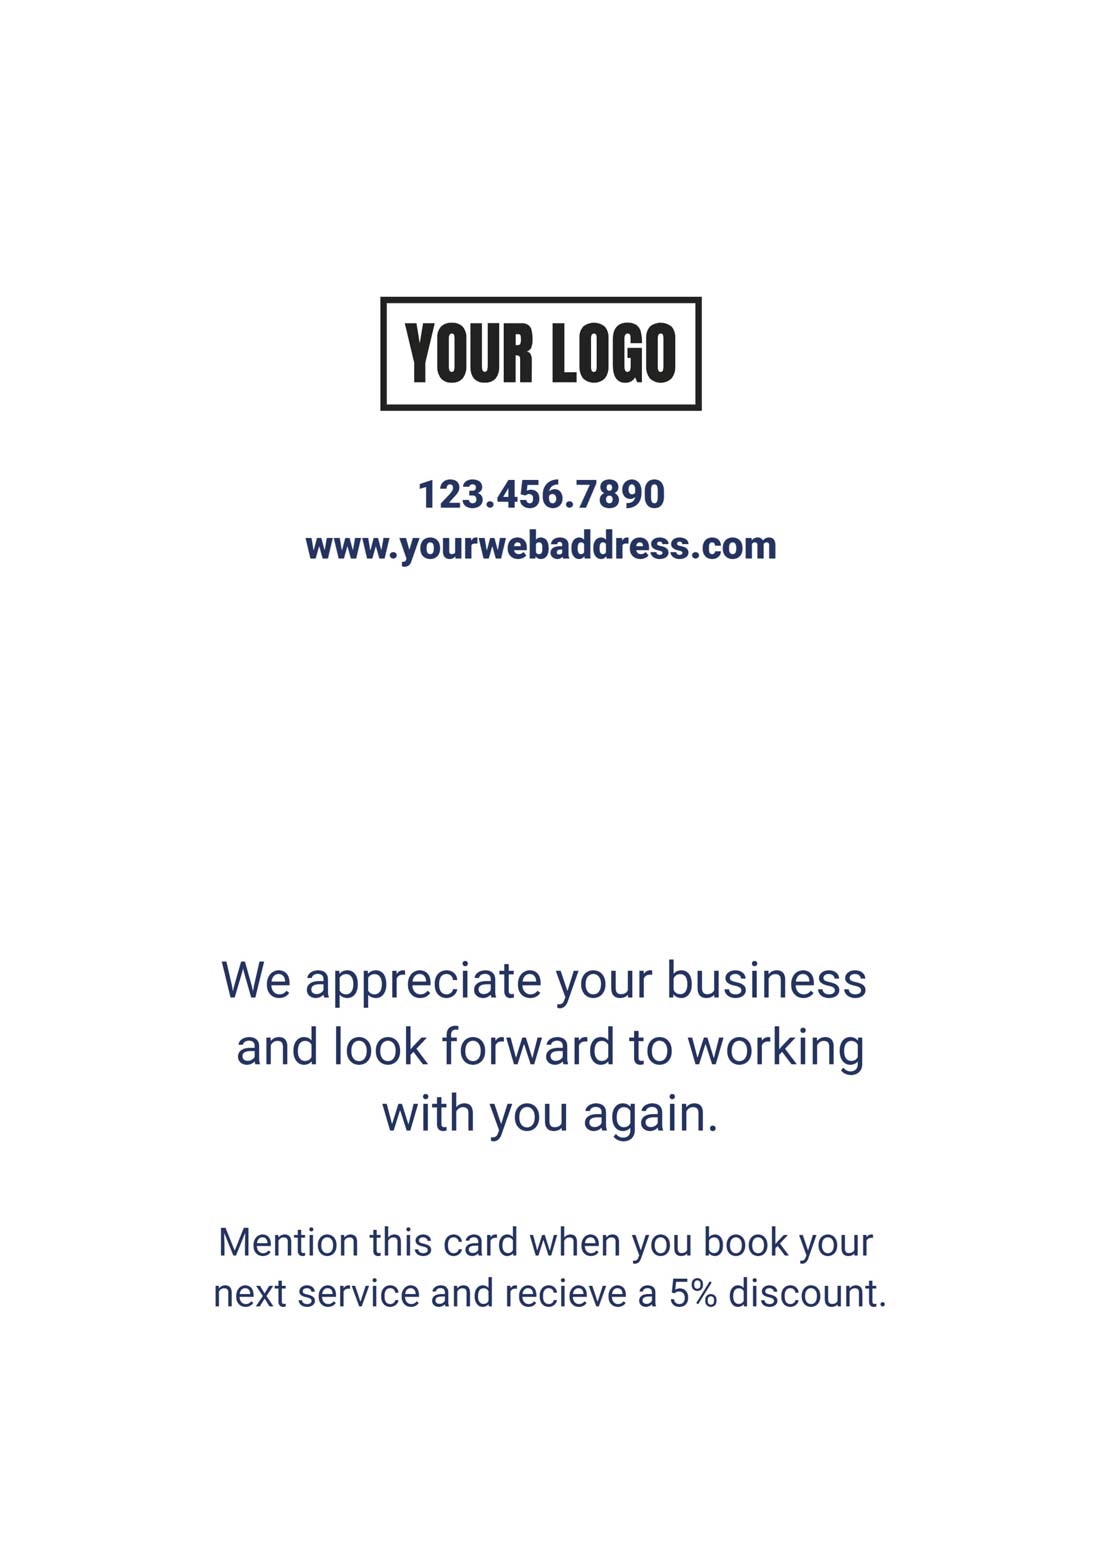 Thank You For Your Business - Thank You Card